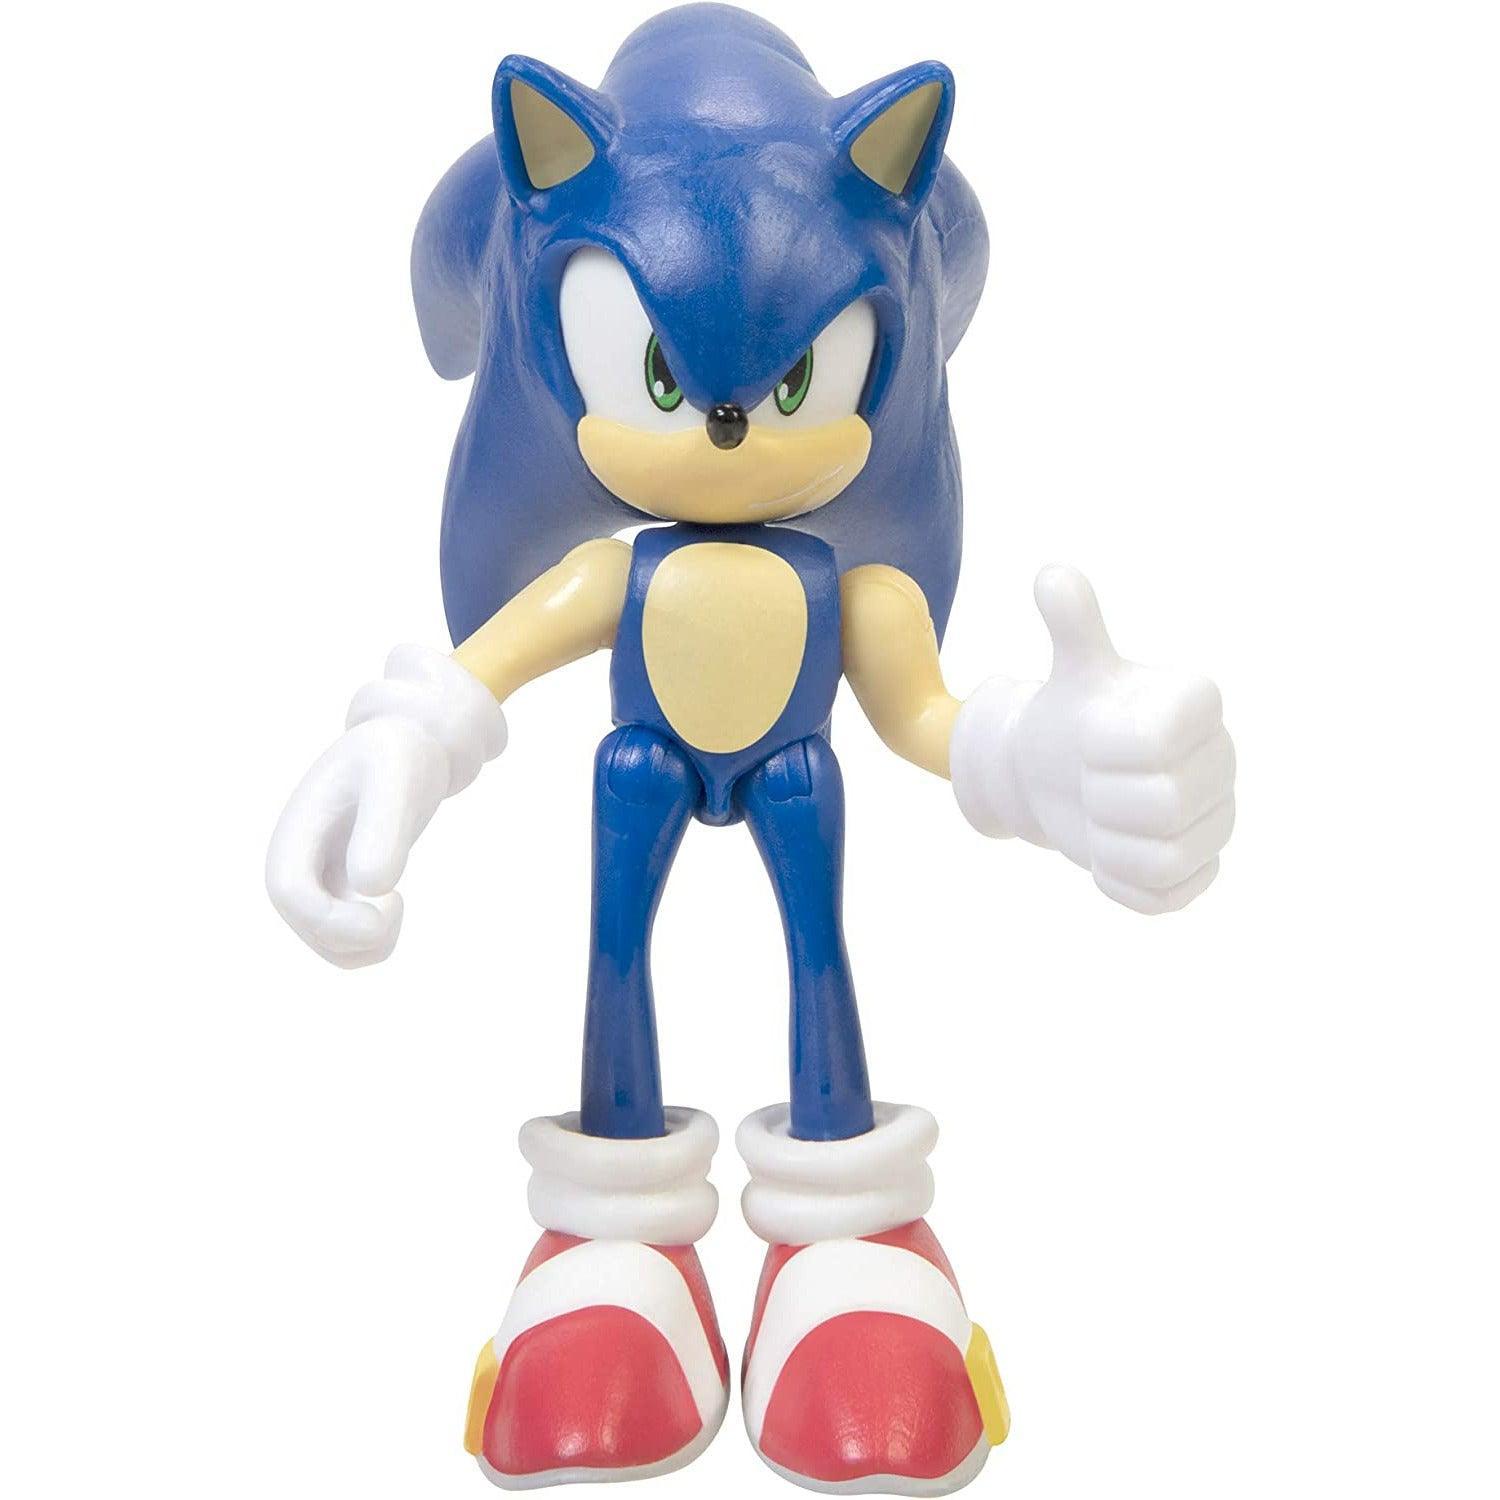 Sonic The Hedgehog Action Figure 2.5 Inch Sonic Collectible Toy - BumbleToys - 5-7 Years, 8-13 Years, Boys, OXE, Pre-Order, Sonic